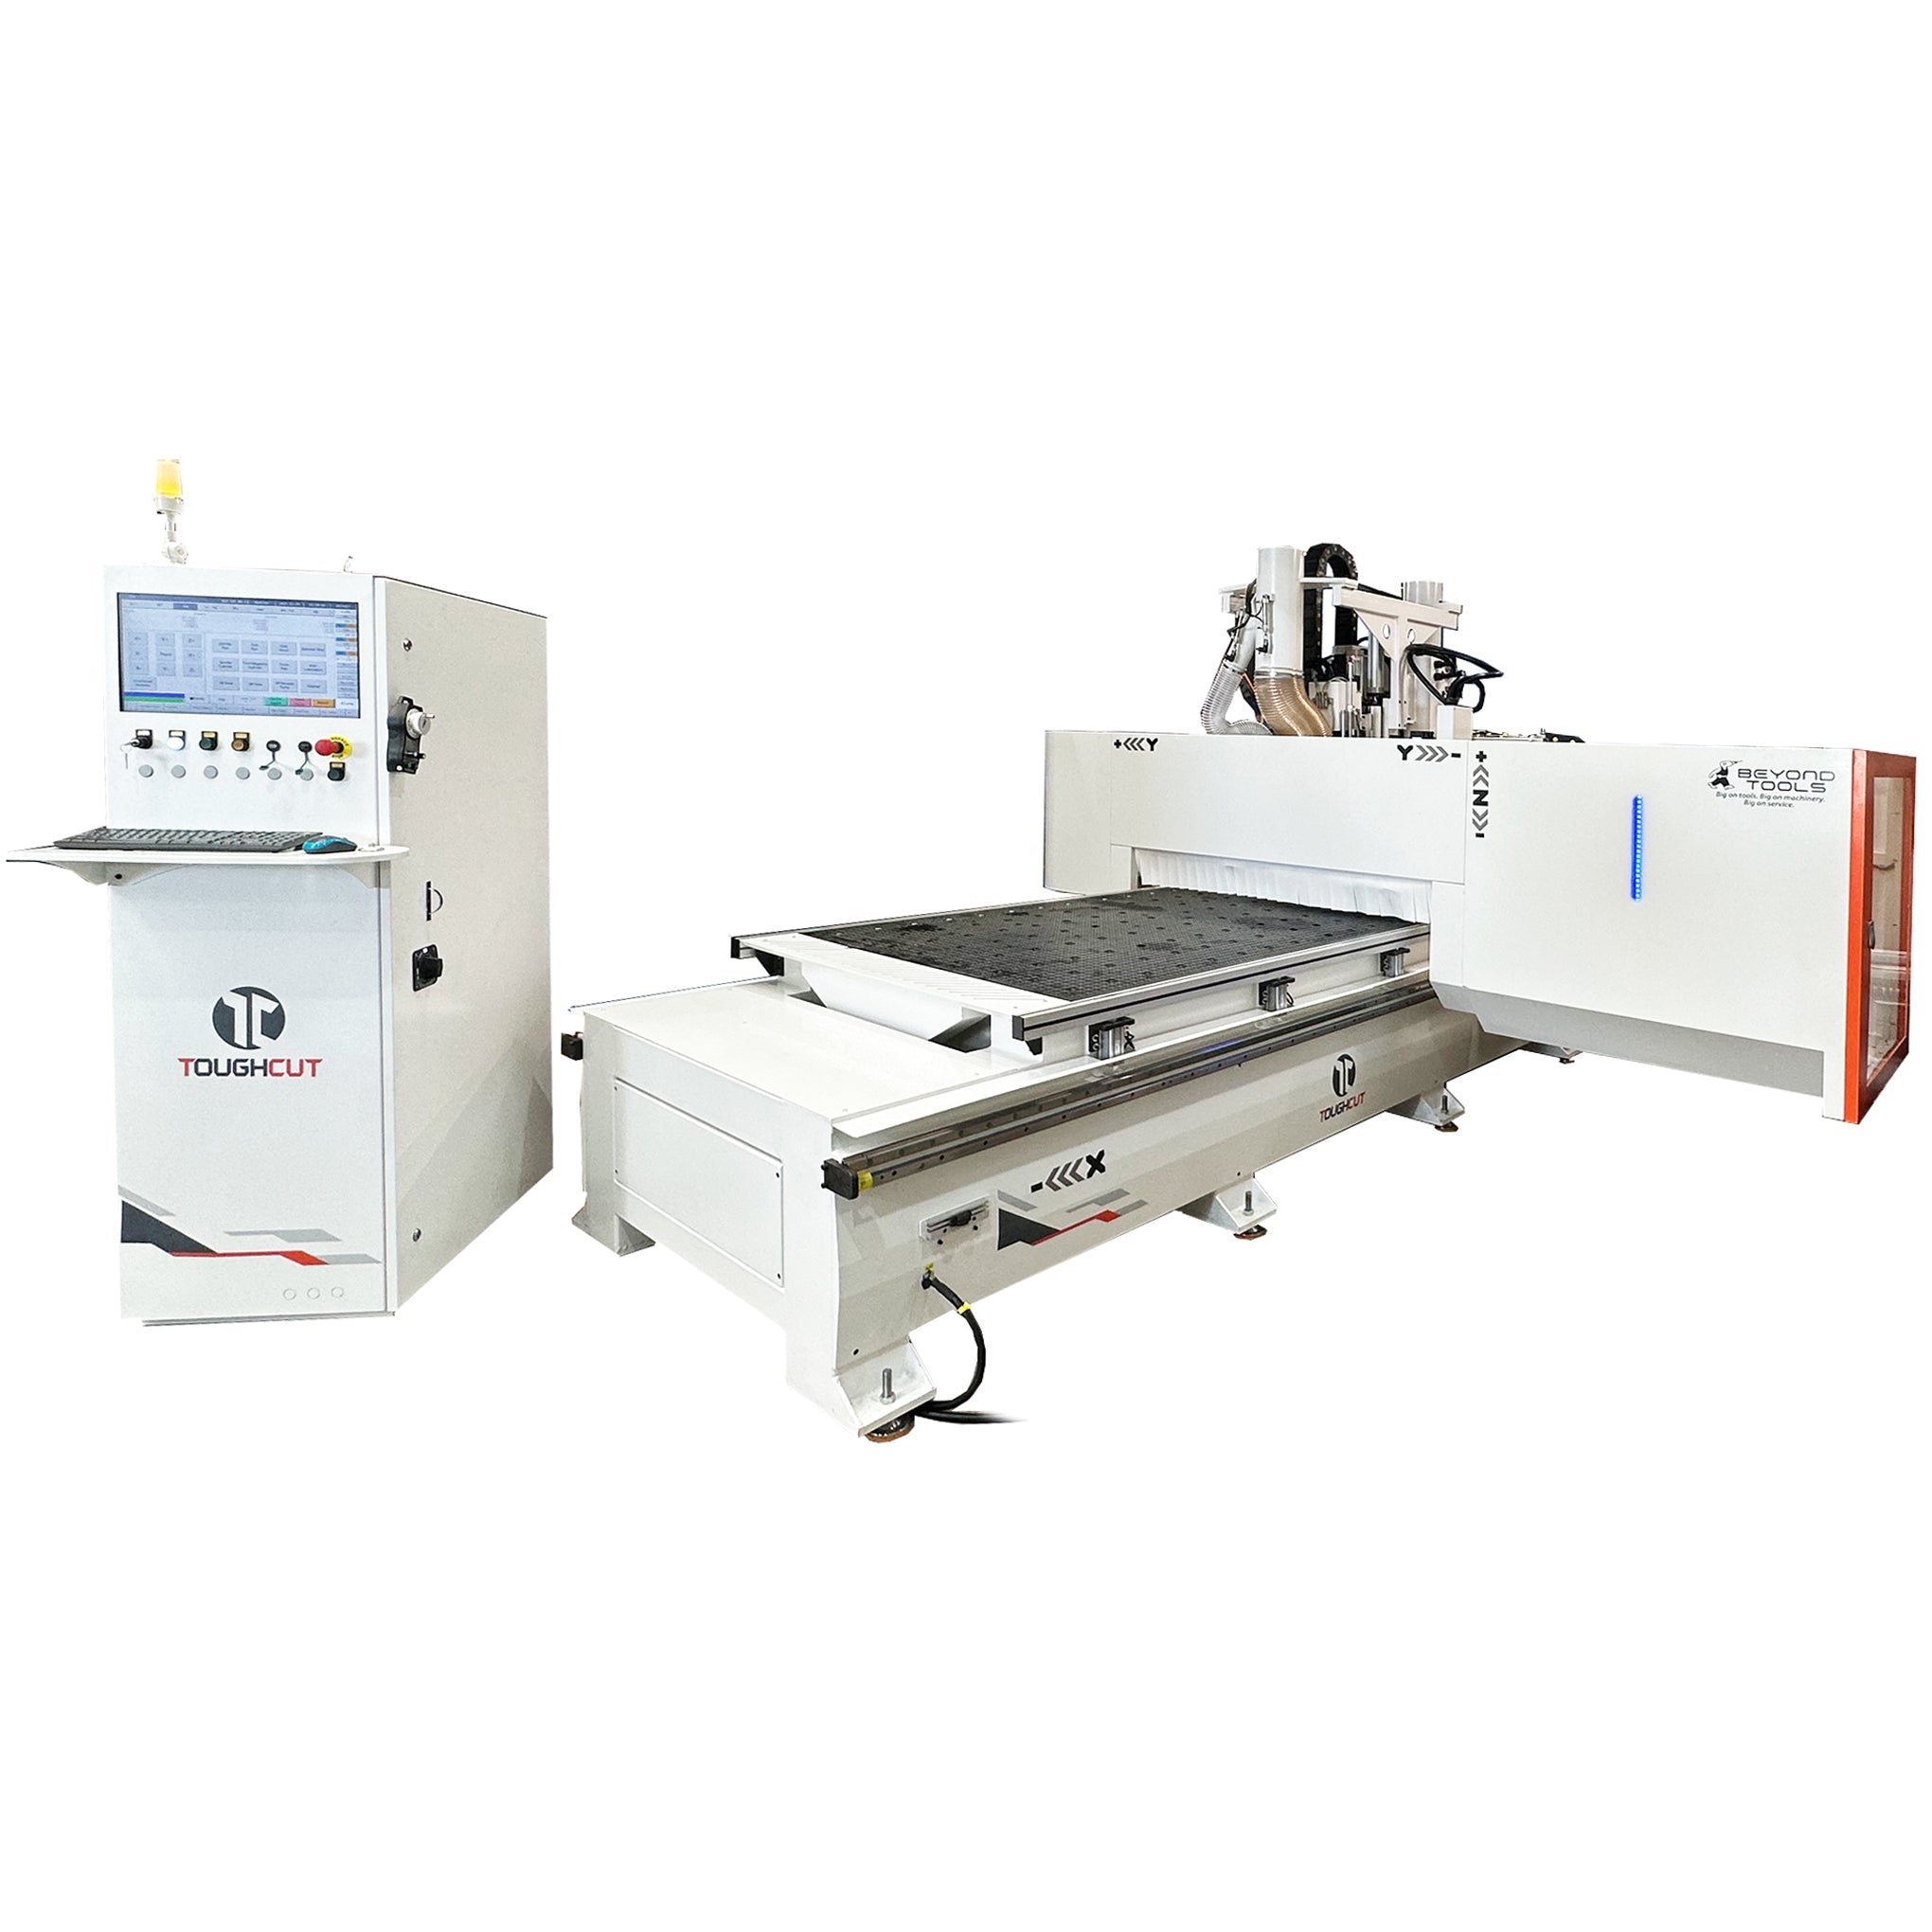 1300mm x 2500mm CNC Router with Auto Tool Change Spindle with 12 Tool Rotary Carousel + Vacuum Table (with 9.5KW Pump) ZIRCON TCVA30-1325 by Toughcut